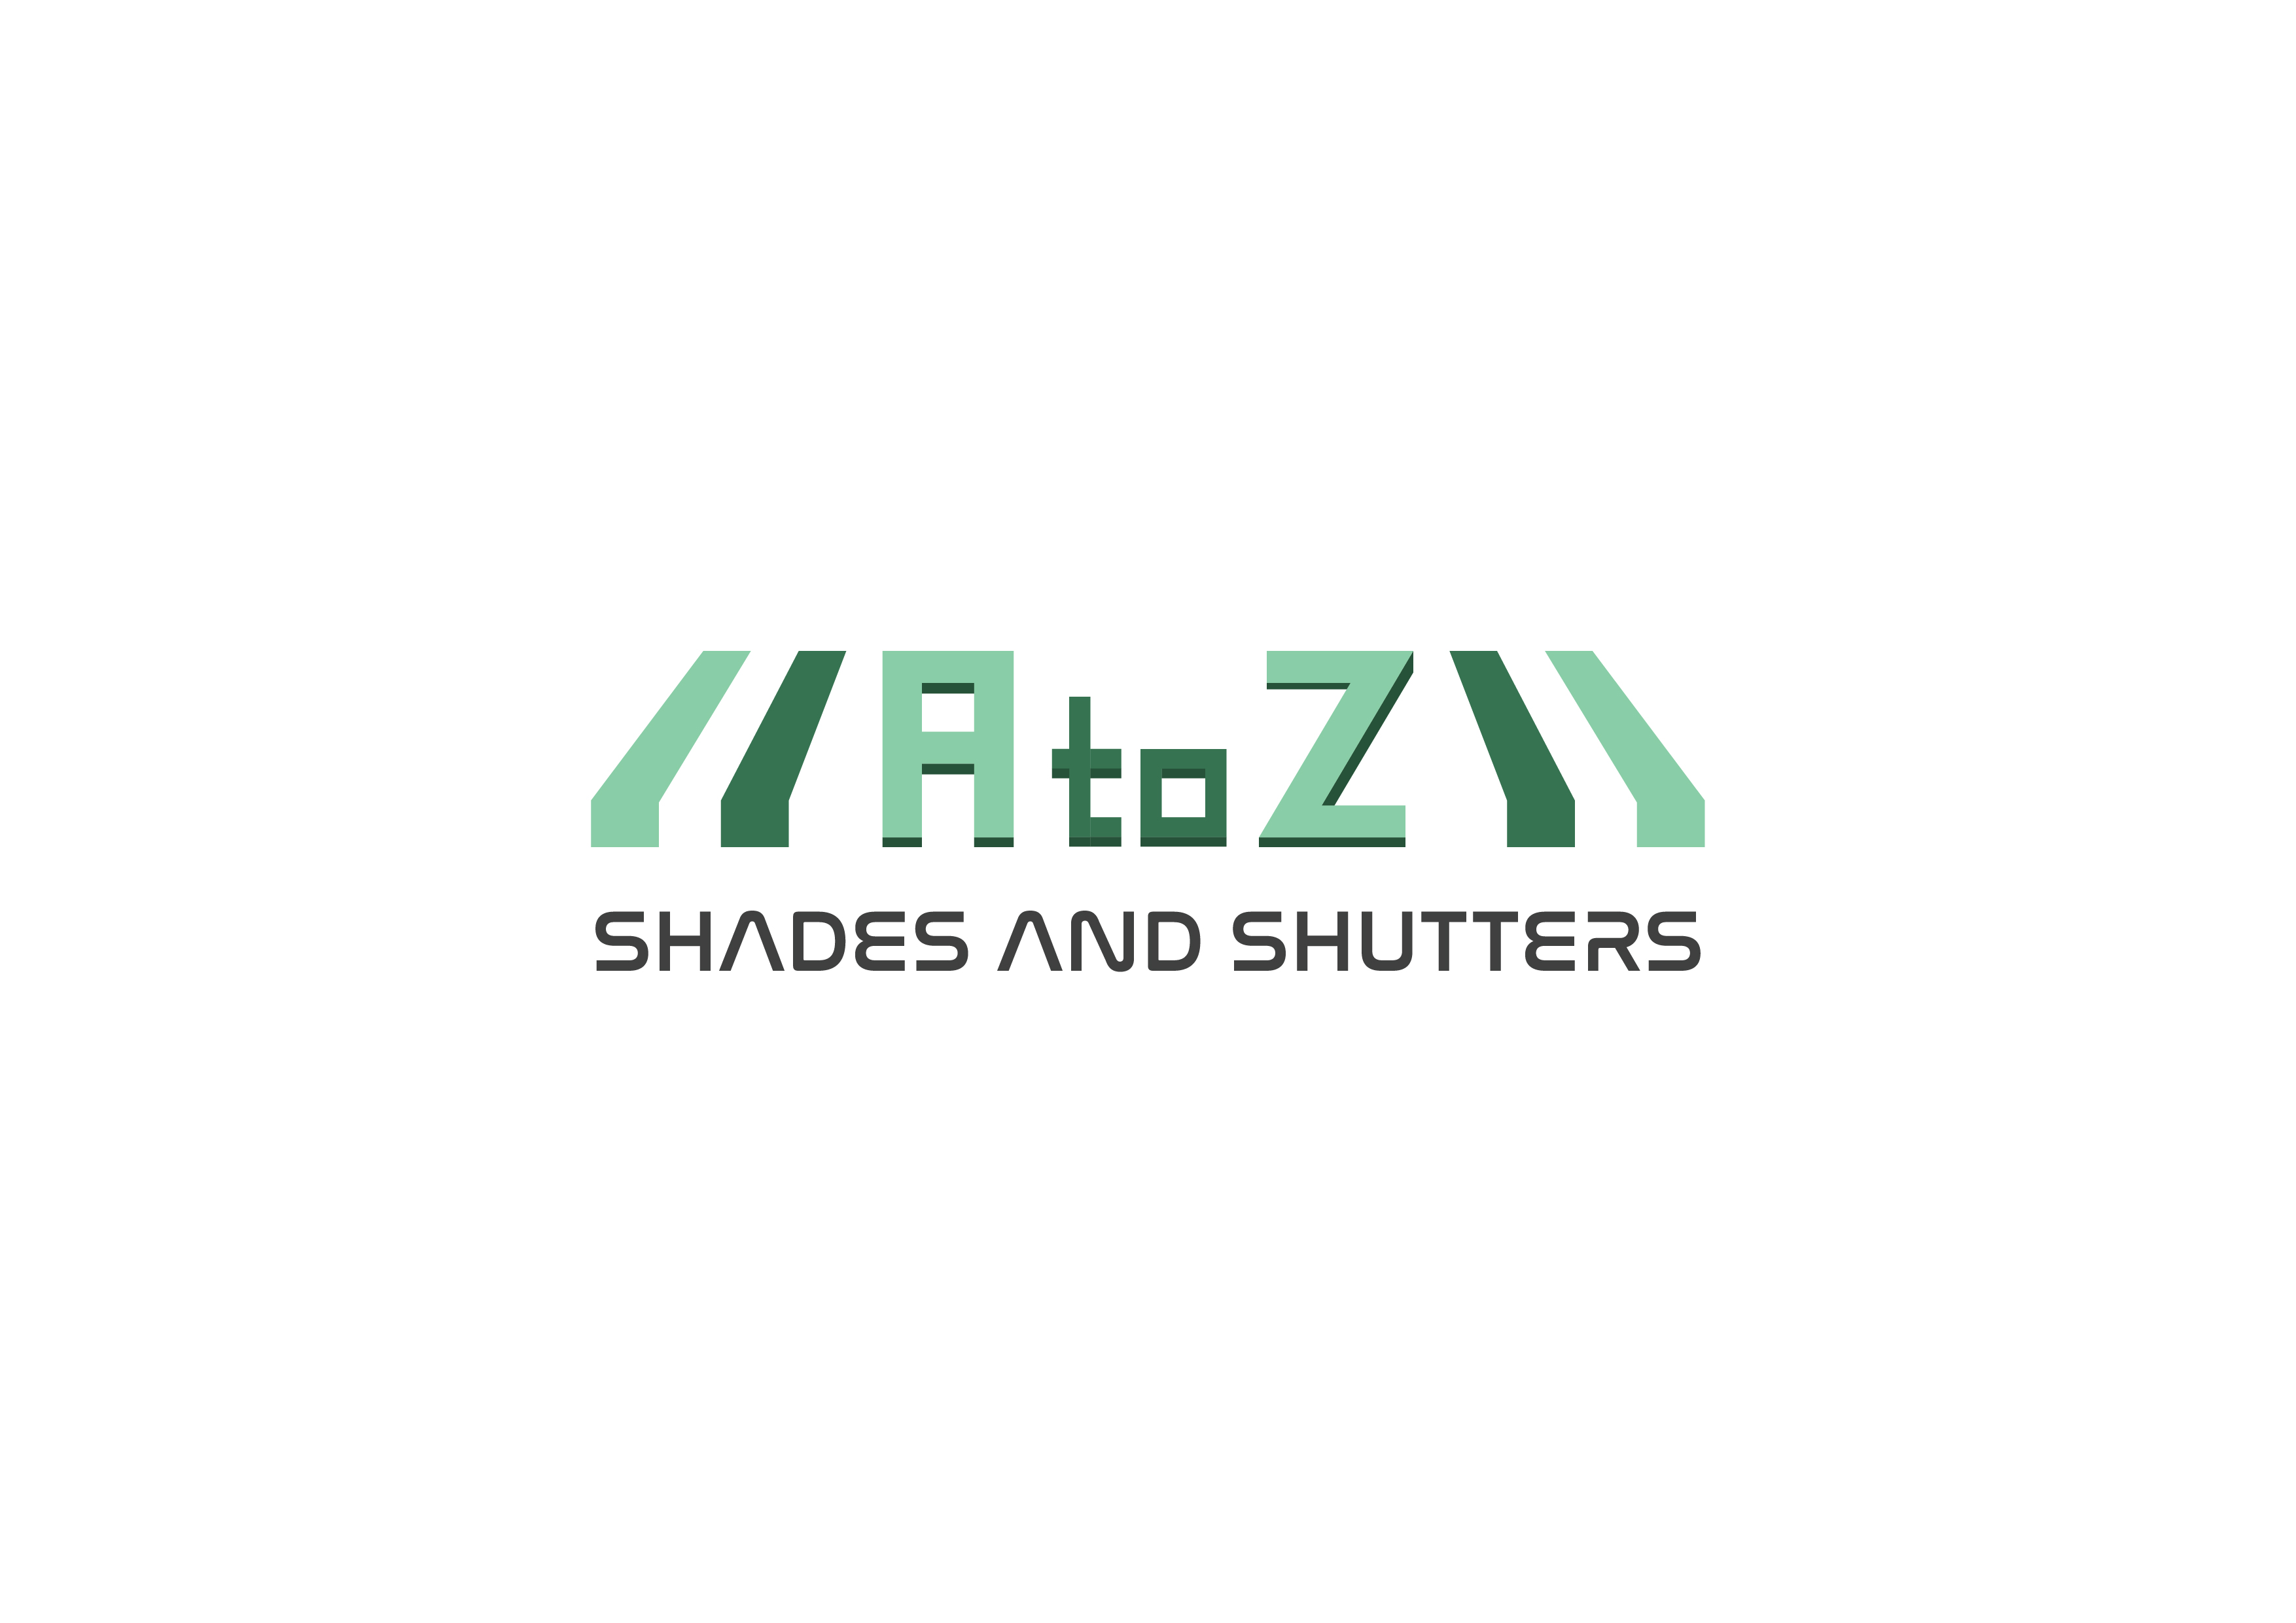 A To Z Shades And Shutters - Unlicensed Contractor Logo